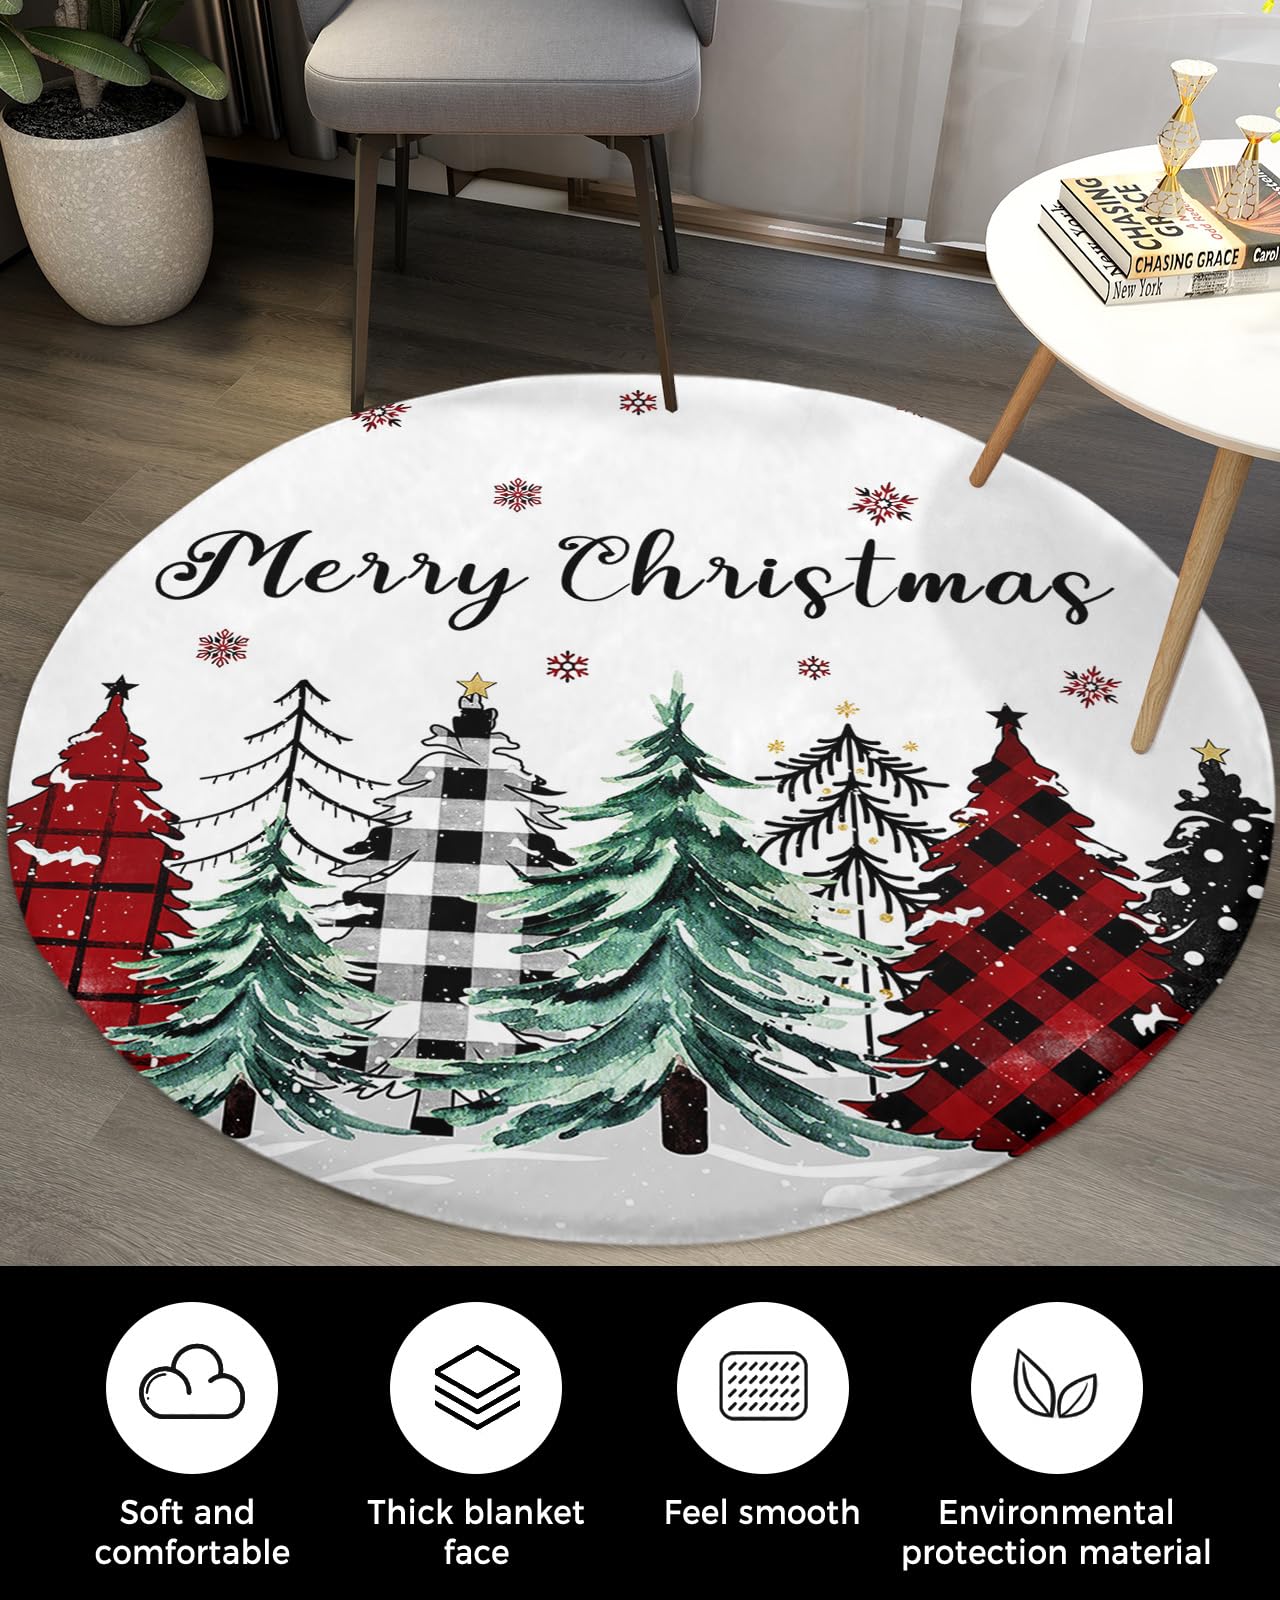 Buffalo Plaid Tree Fluffy Round Area Rug Carpets 3.3ft, Plush Shaggy Carpet Soft Circular Rugs, Non-Slip Fuzzy Accent Floor Mat for Living Room Bedroom Nursery Decor Christmas Red Green Black Dots